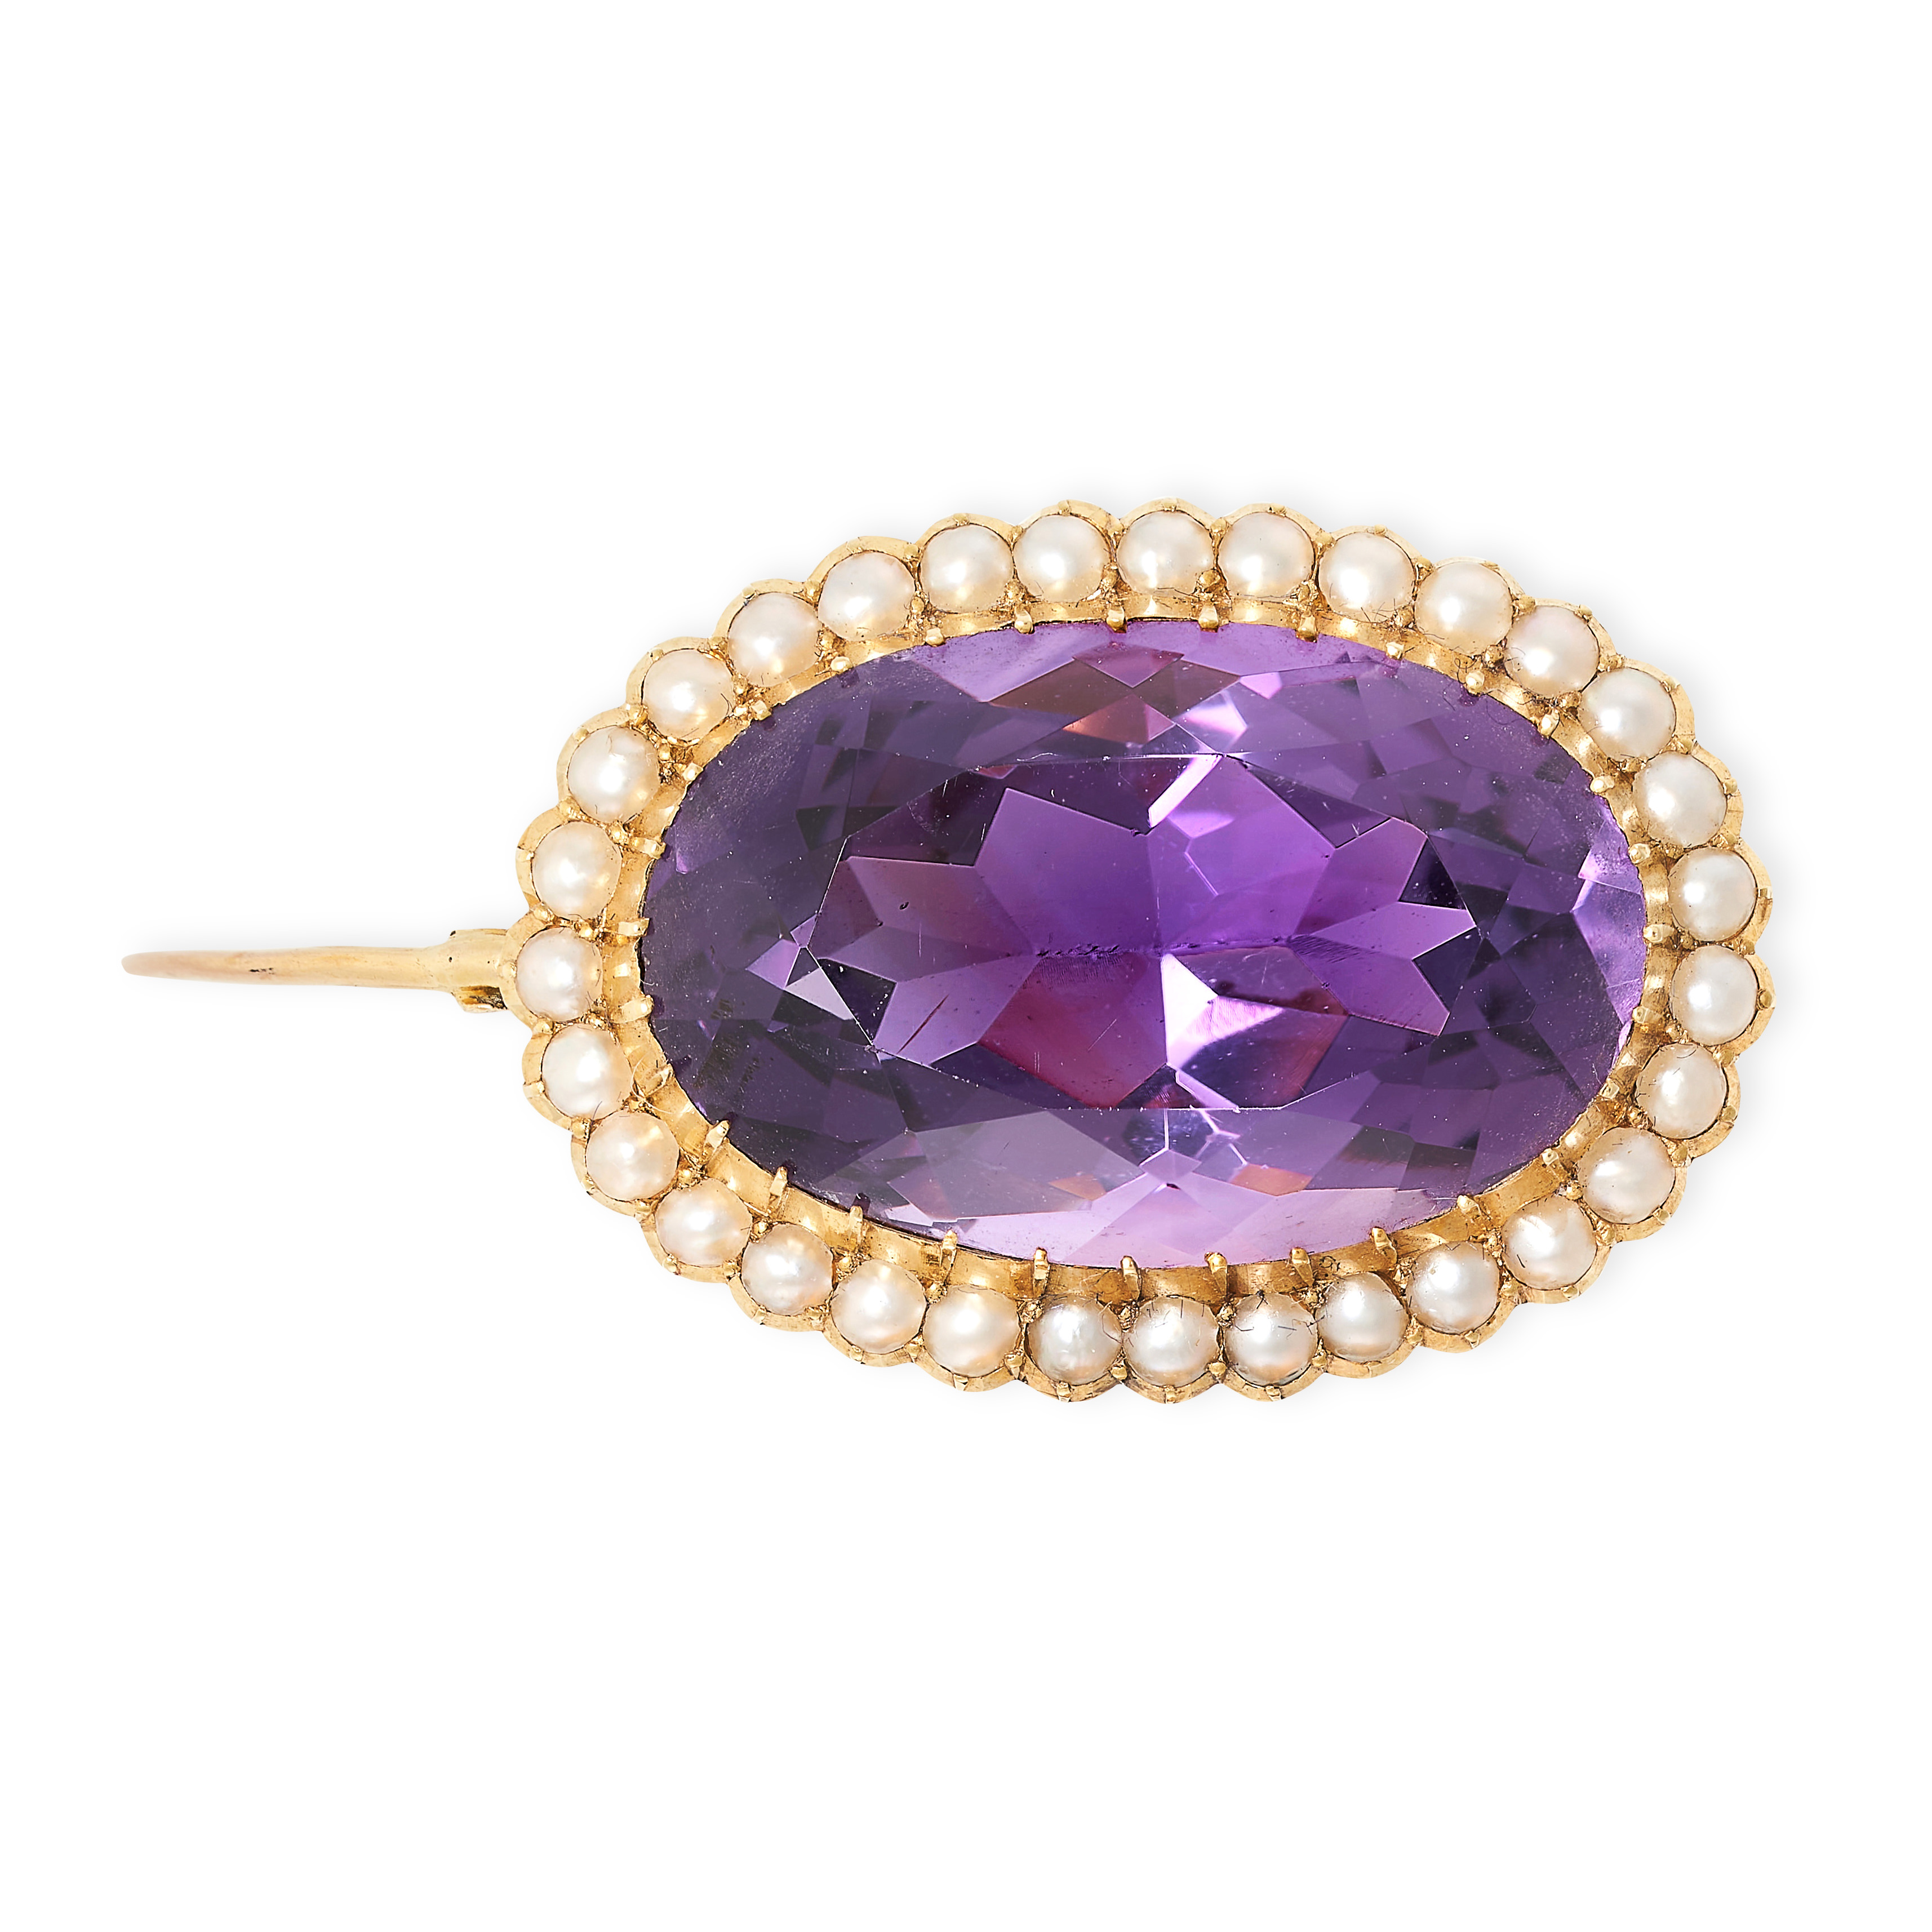 AN ANTIQUE AMETHYST AND PEARL BROOCH in yellow gold, set with an oval cut amethyst within a